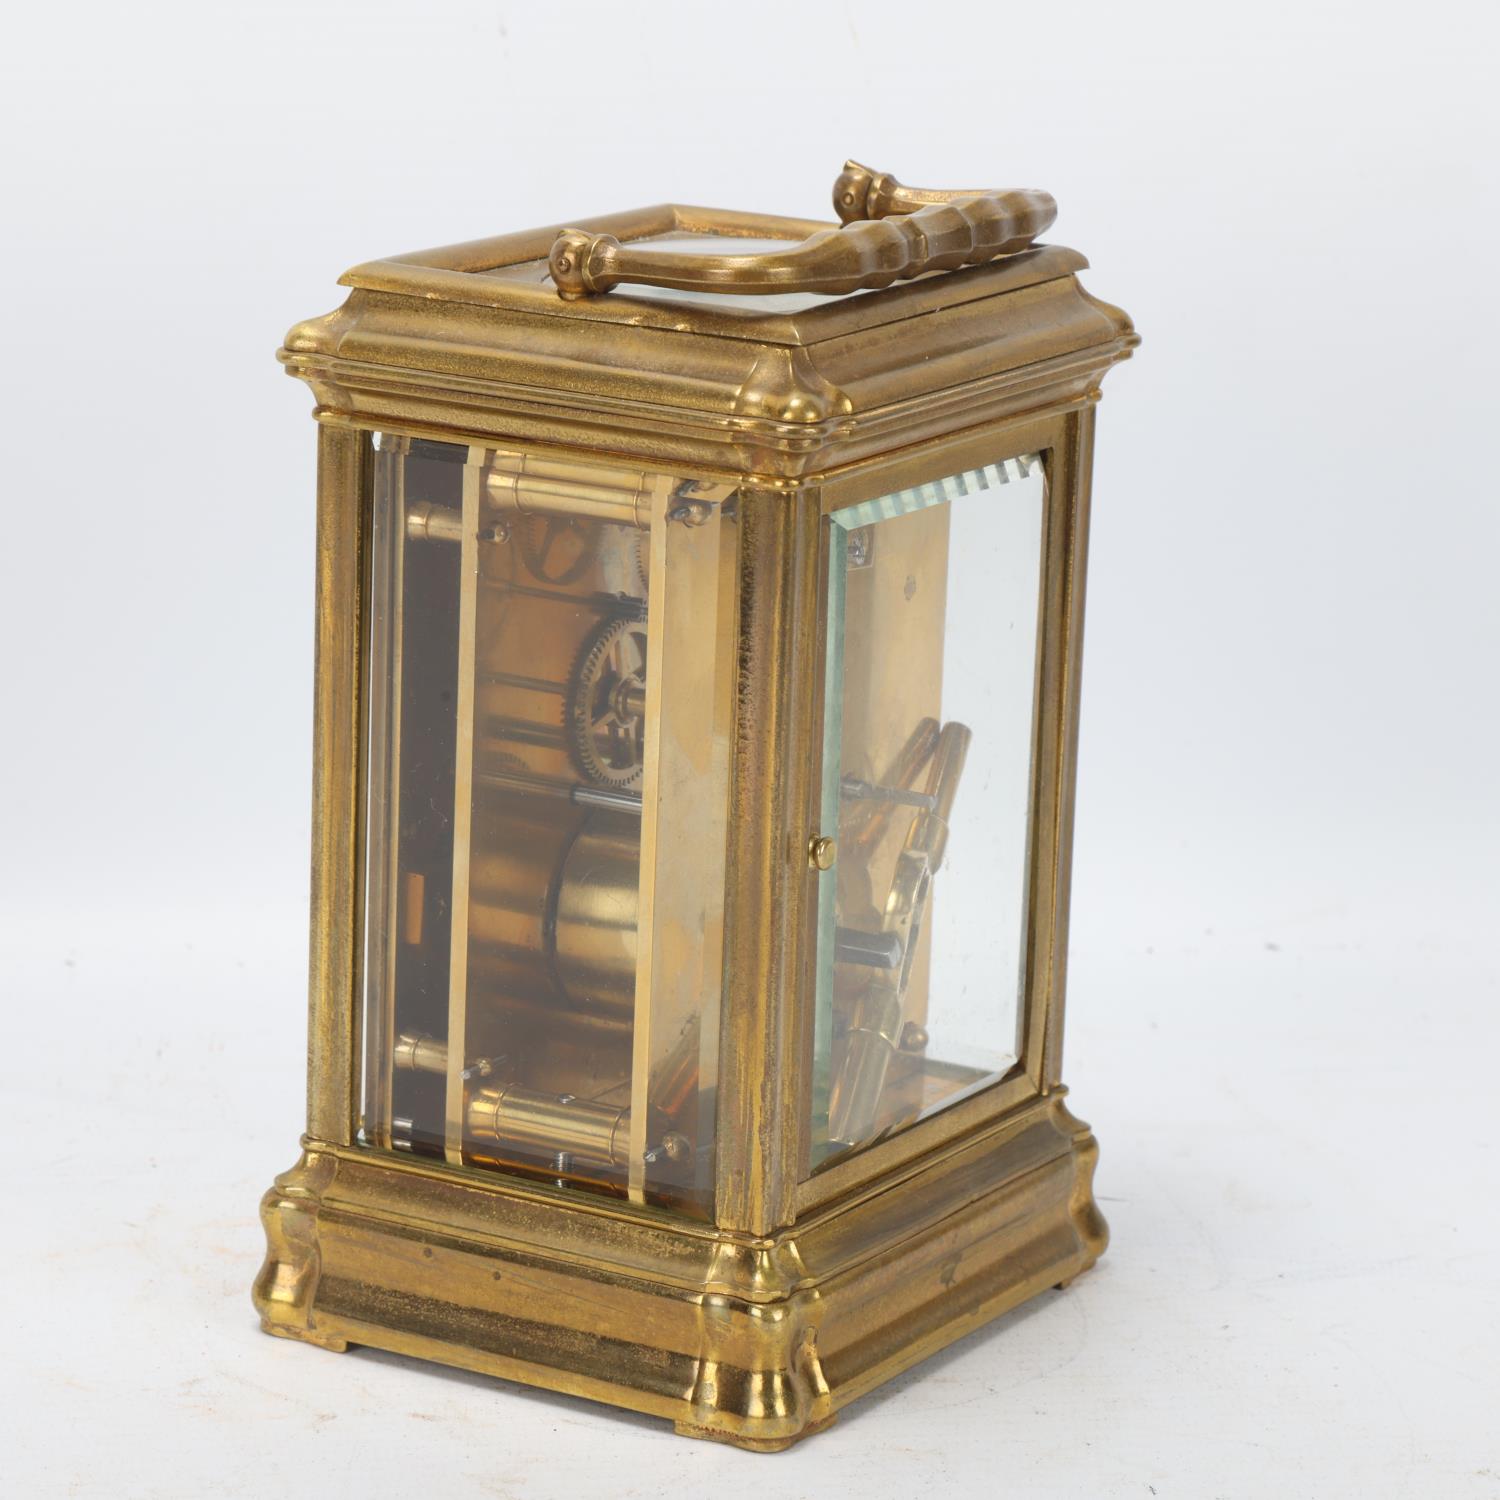 French brass-cased carriage clock, by James Beaven, case height 15cm Brass case lightly tarnished, - Image 2 of 3